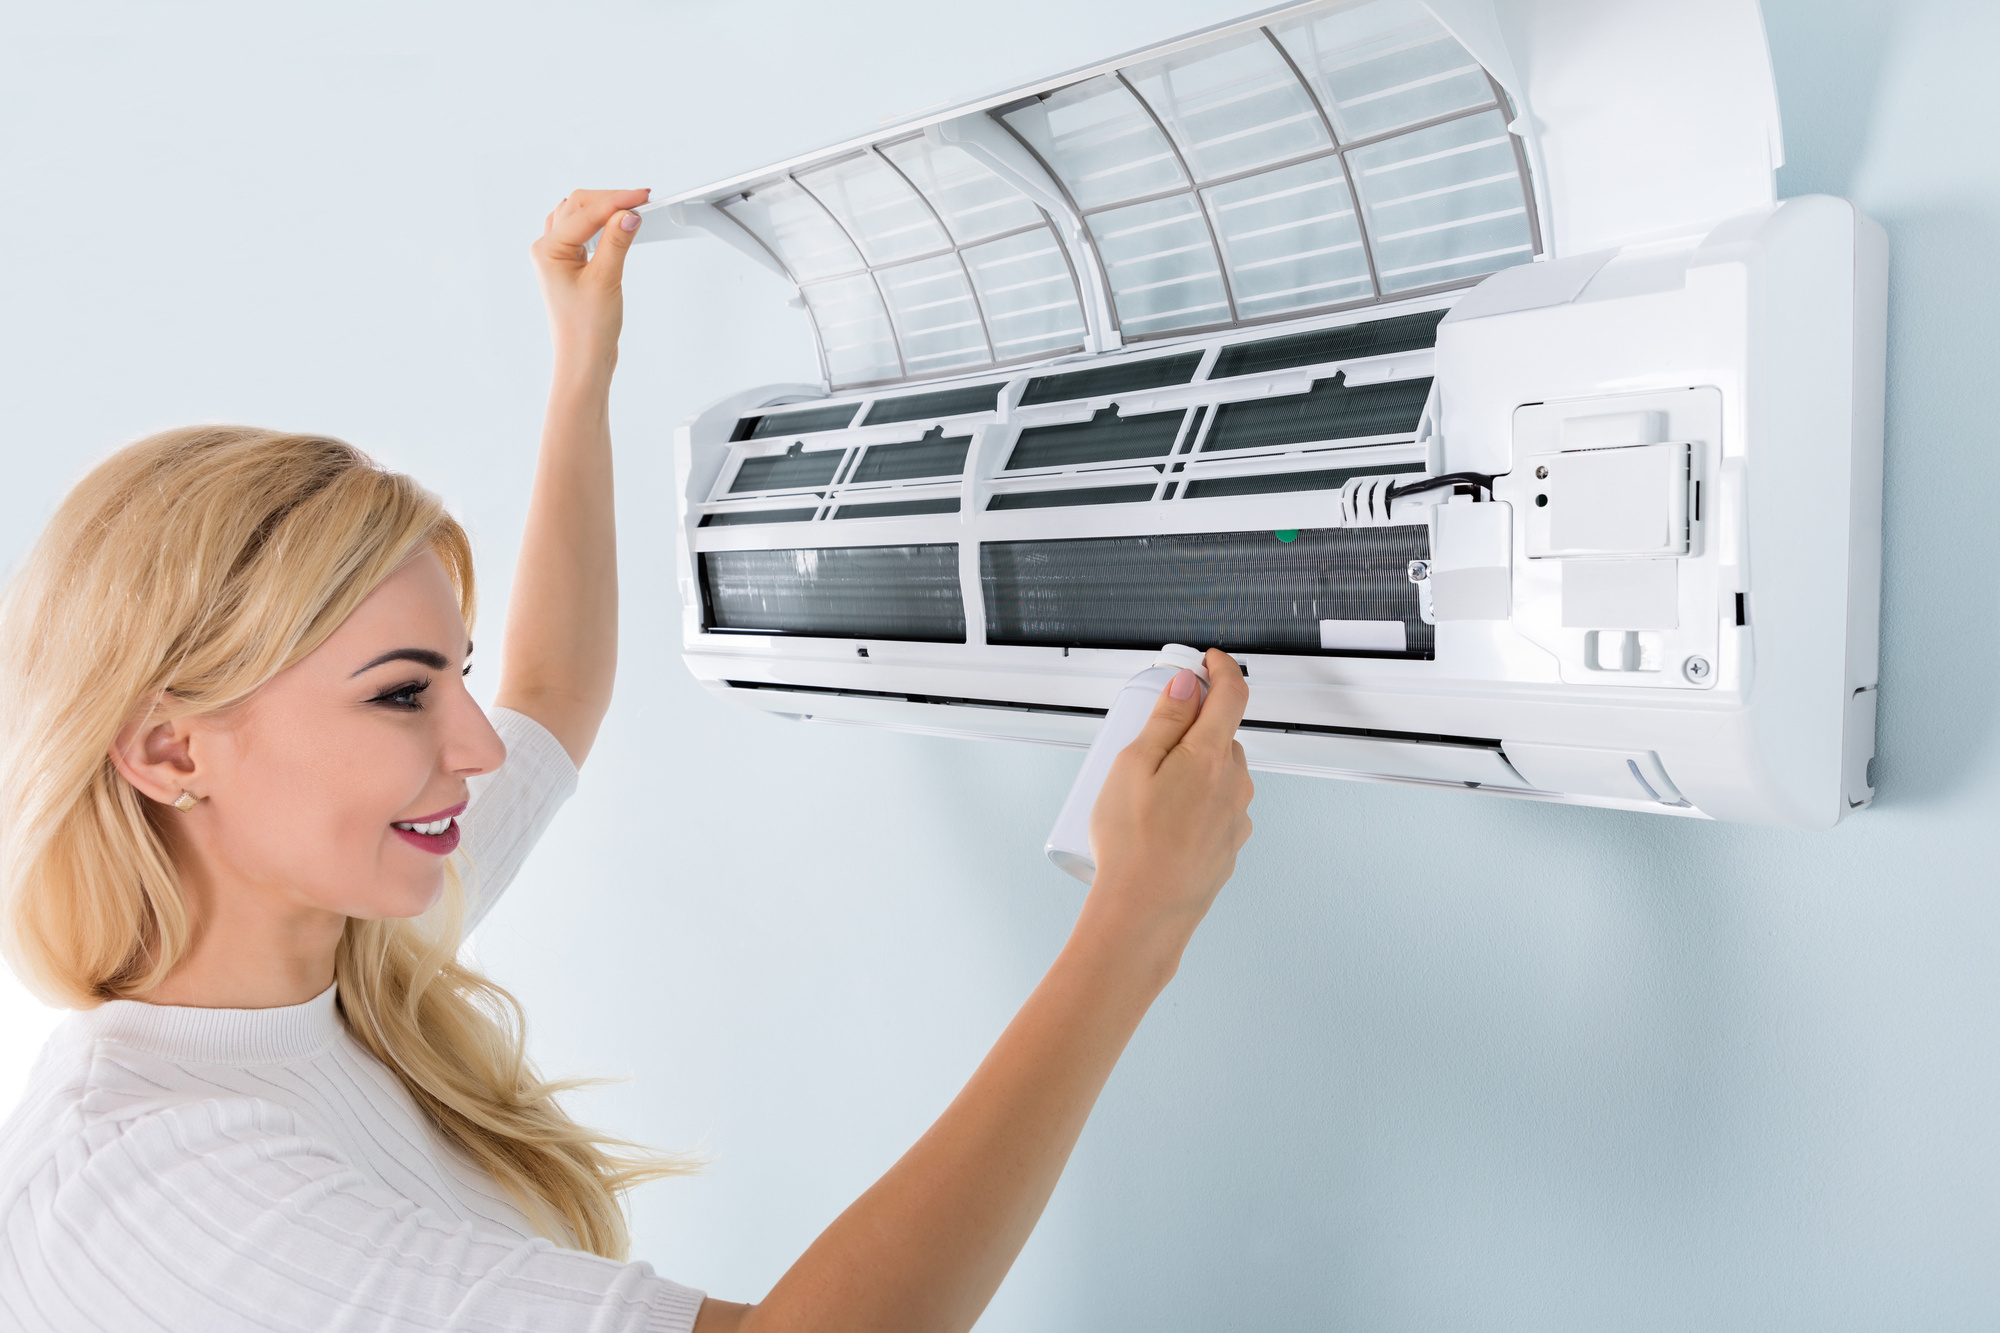 Woman Cleaning Air Conditioner